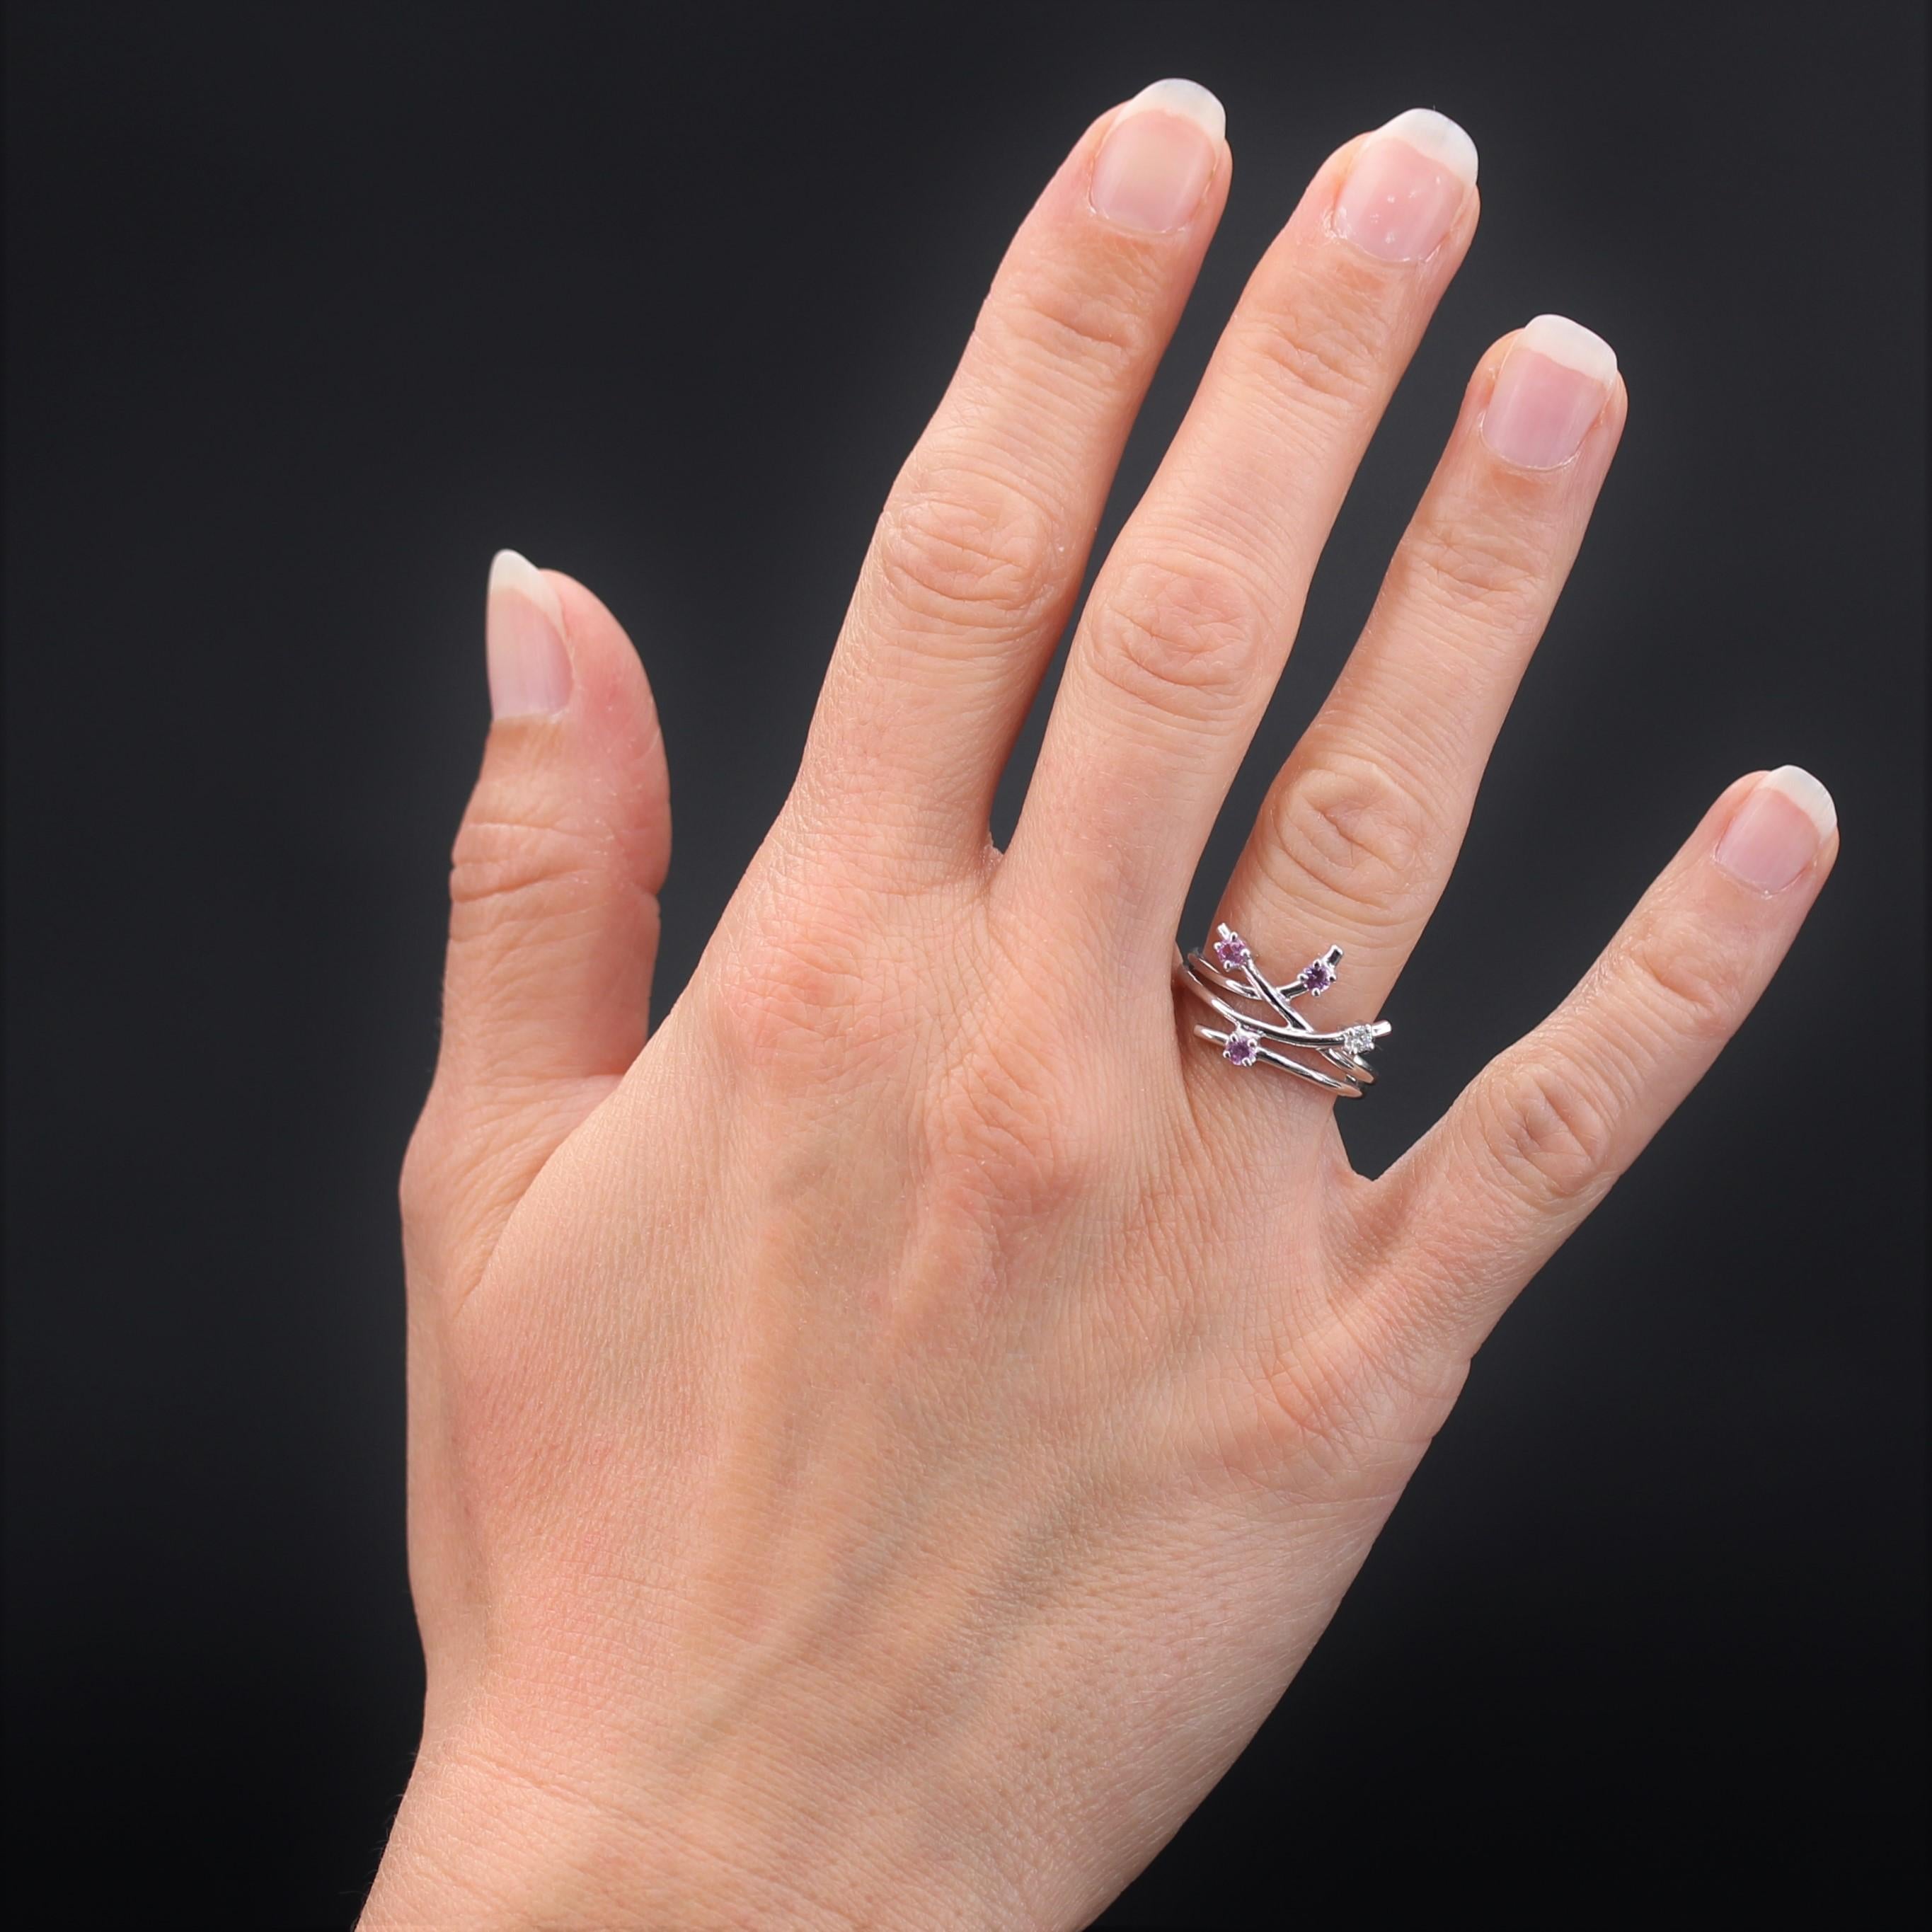 Ring in 18 karats white gold, eagle's head hallmark.
Made of 3 white gold threads that separate asymmetrically on the front, this ring is set with 4 claws of 3 pink sapphires and a diamond.
Height: 1.3 cm, pattern width: 1.7 cm, thickness: 2.9 mm,